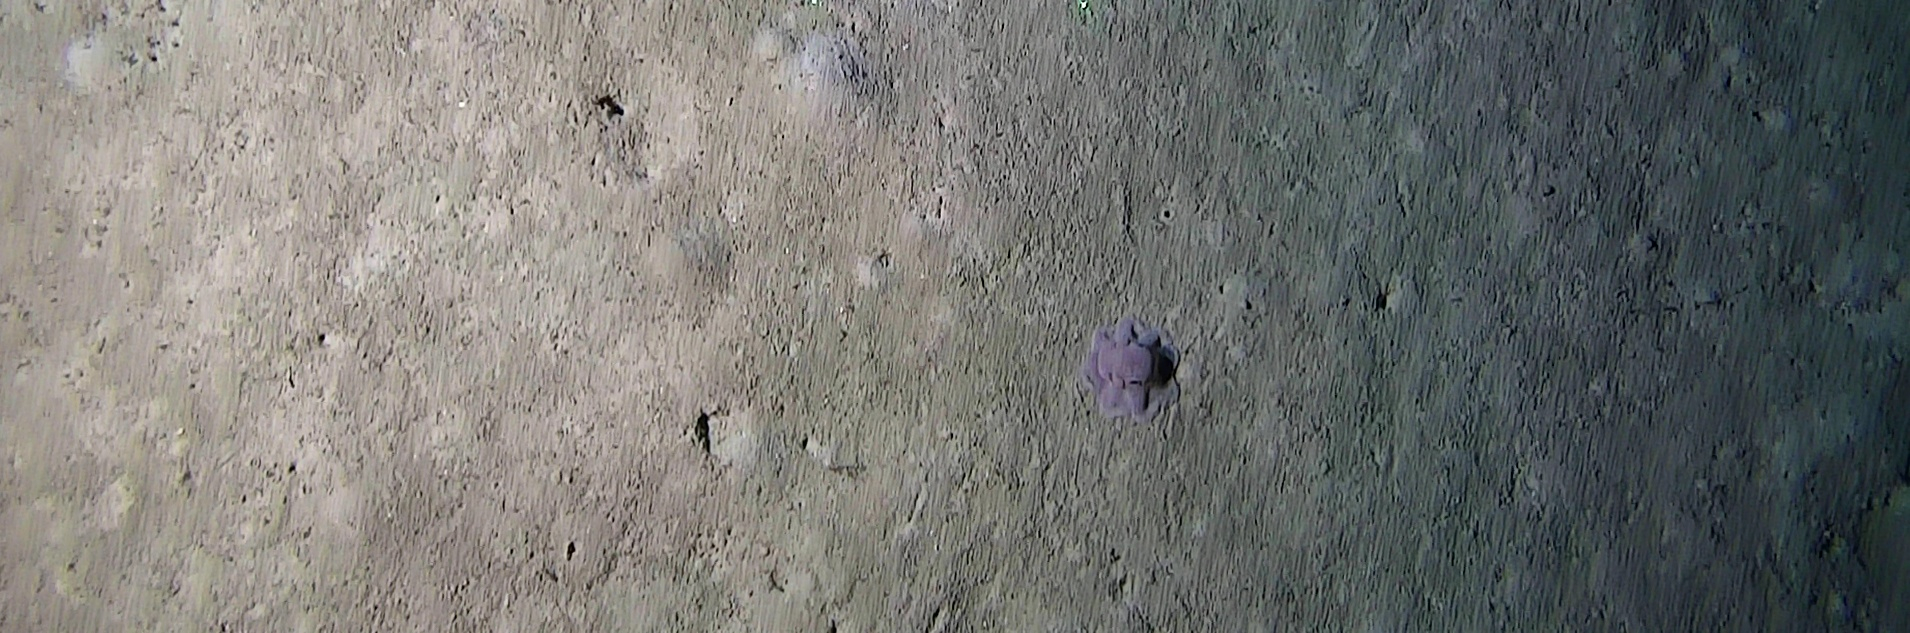 A Dumbo octopus on one of the video transects. Photo: NIOZ.